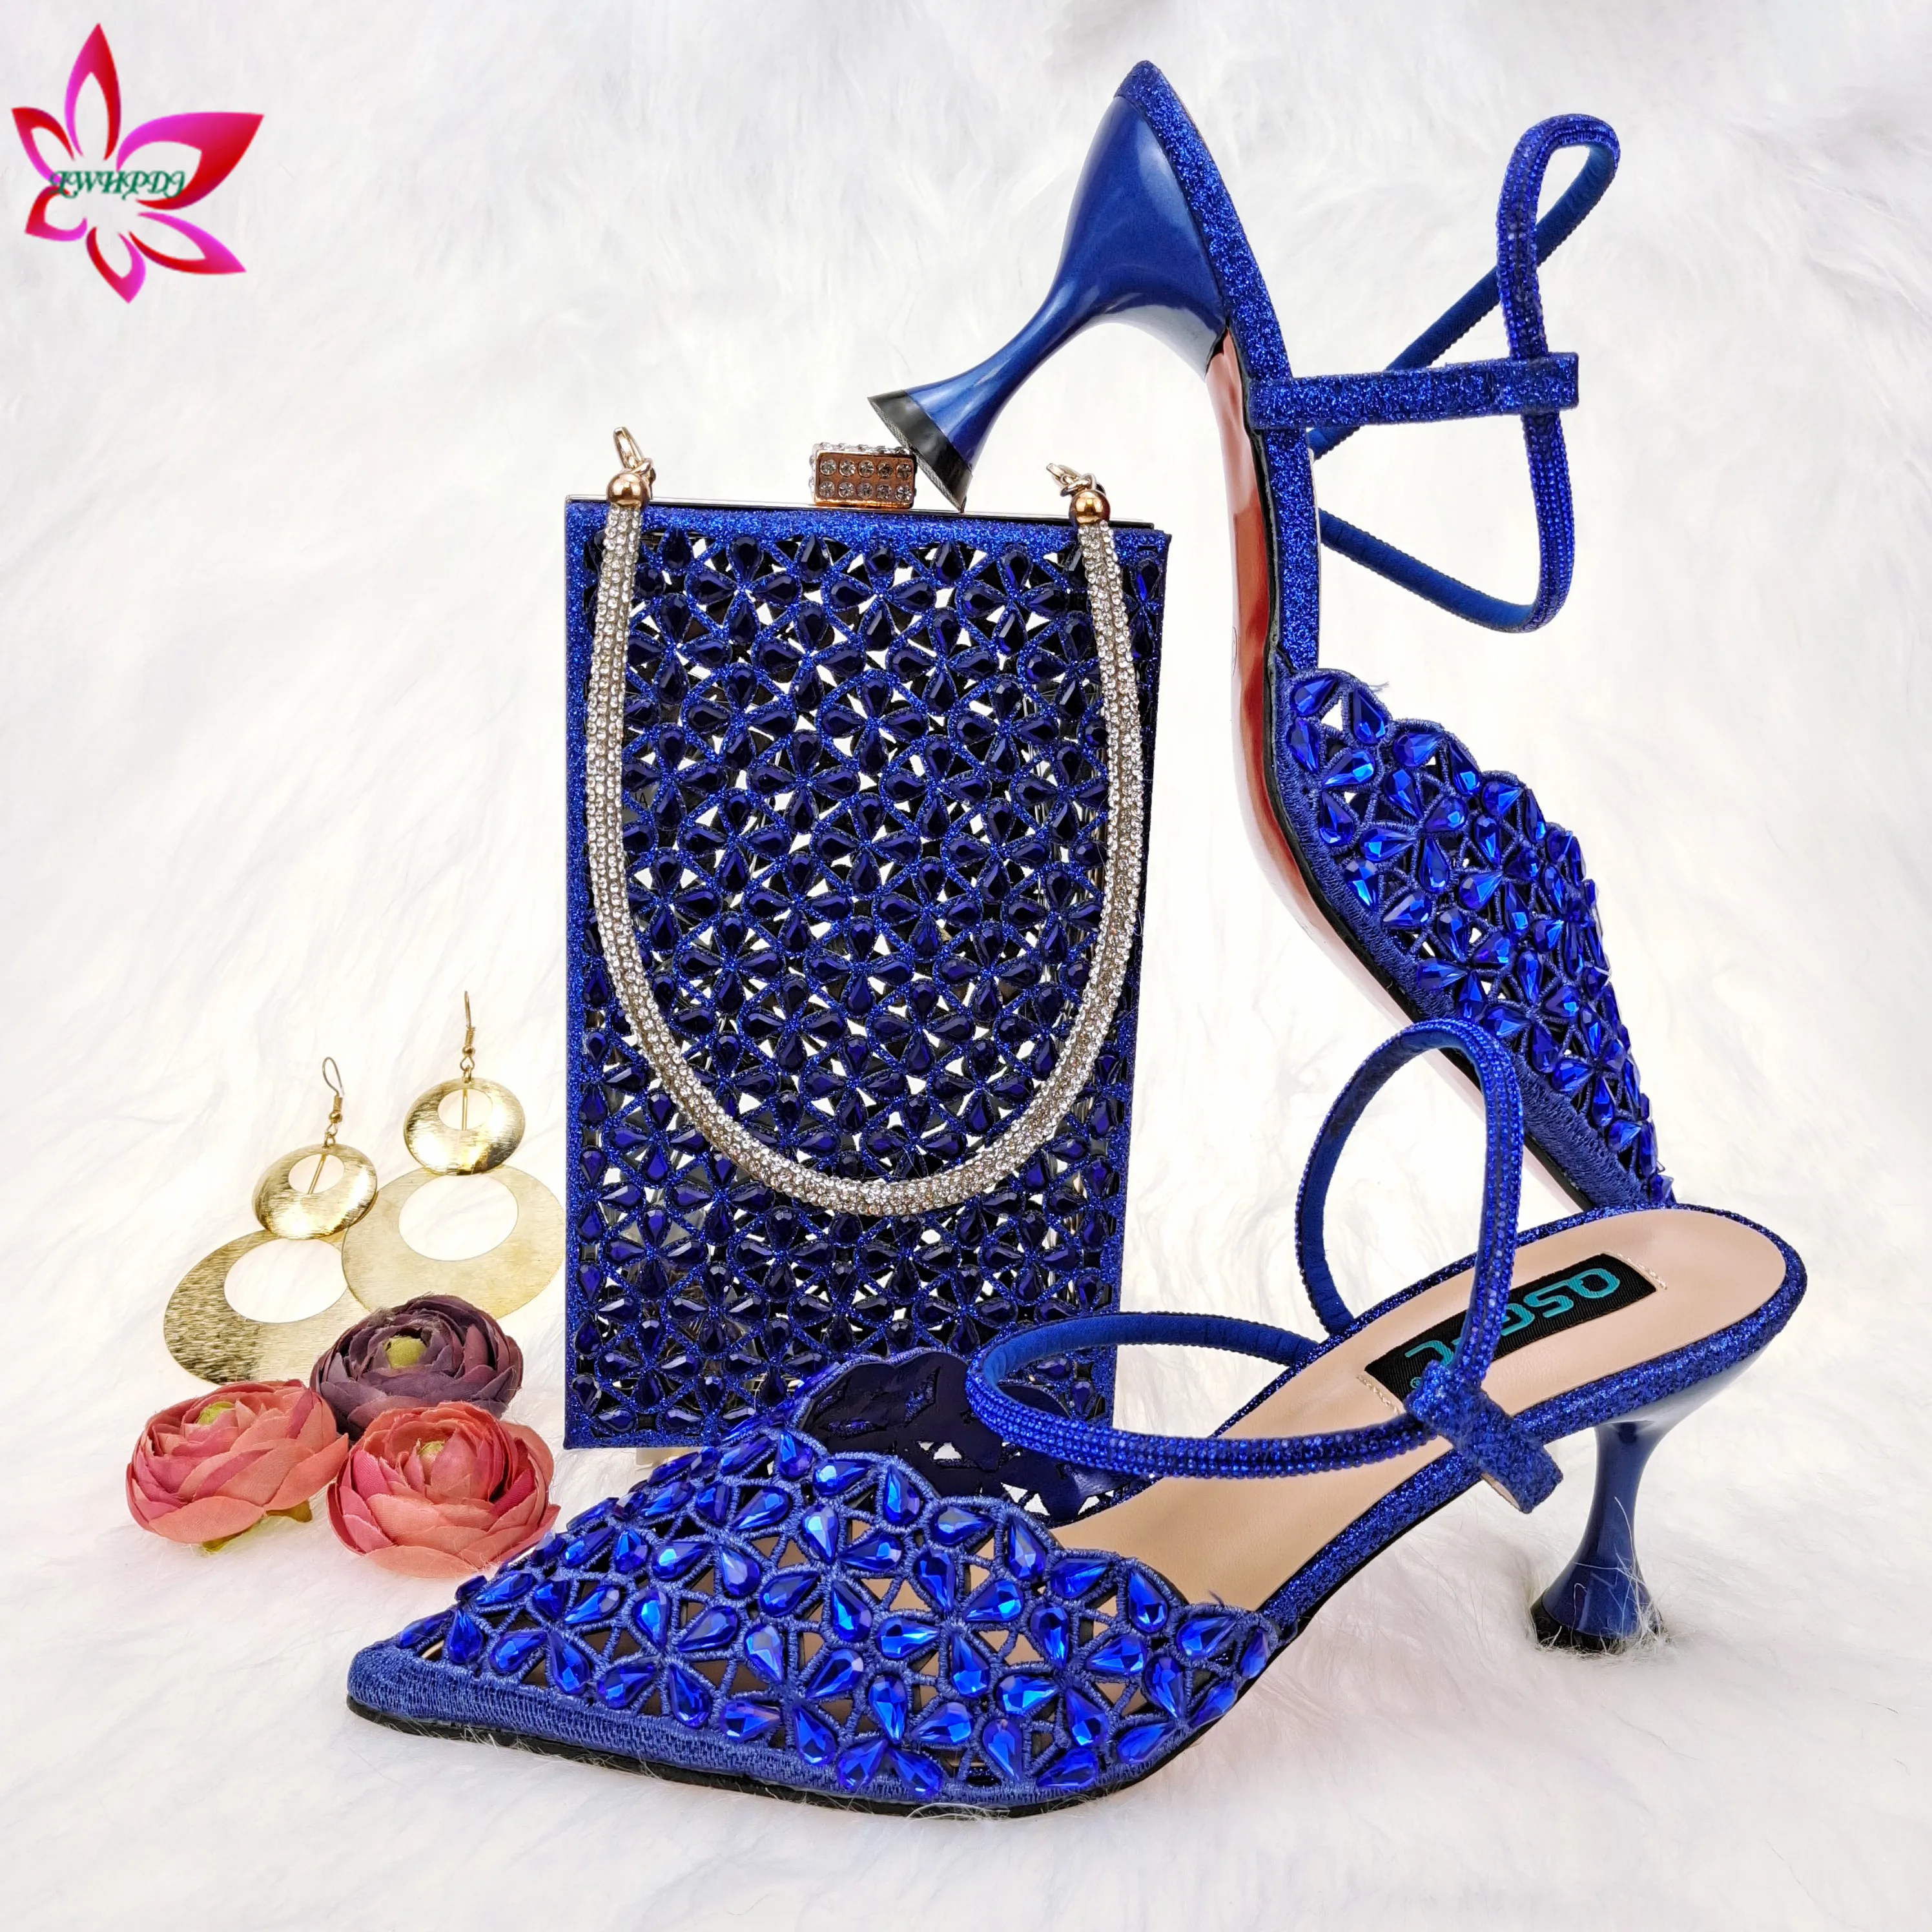 

Hoting Selling Spring Autumn Slingbacks Sandals Shoes Matching Bag Set in Royal Blue For Women Wedding Party